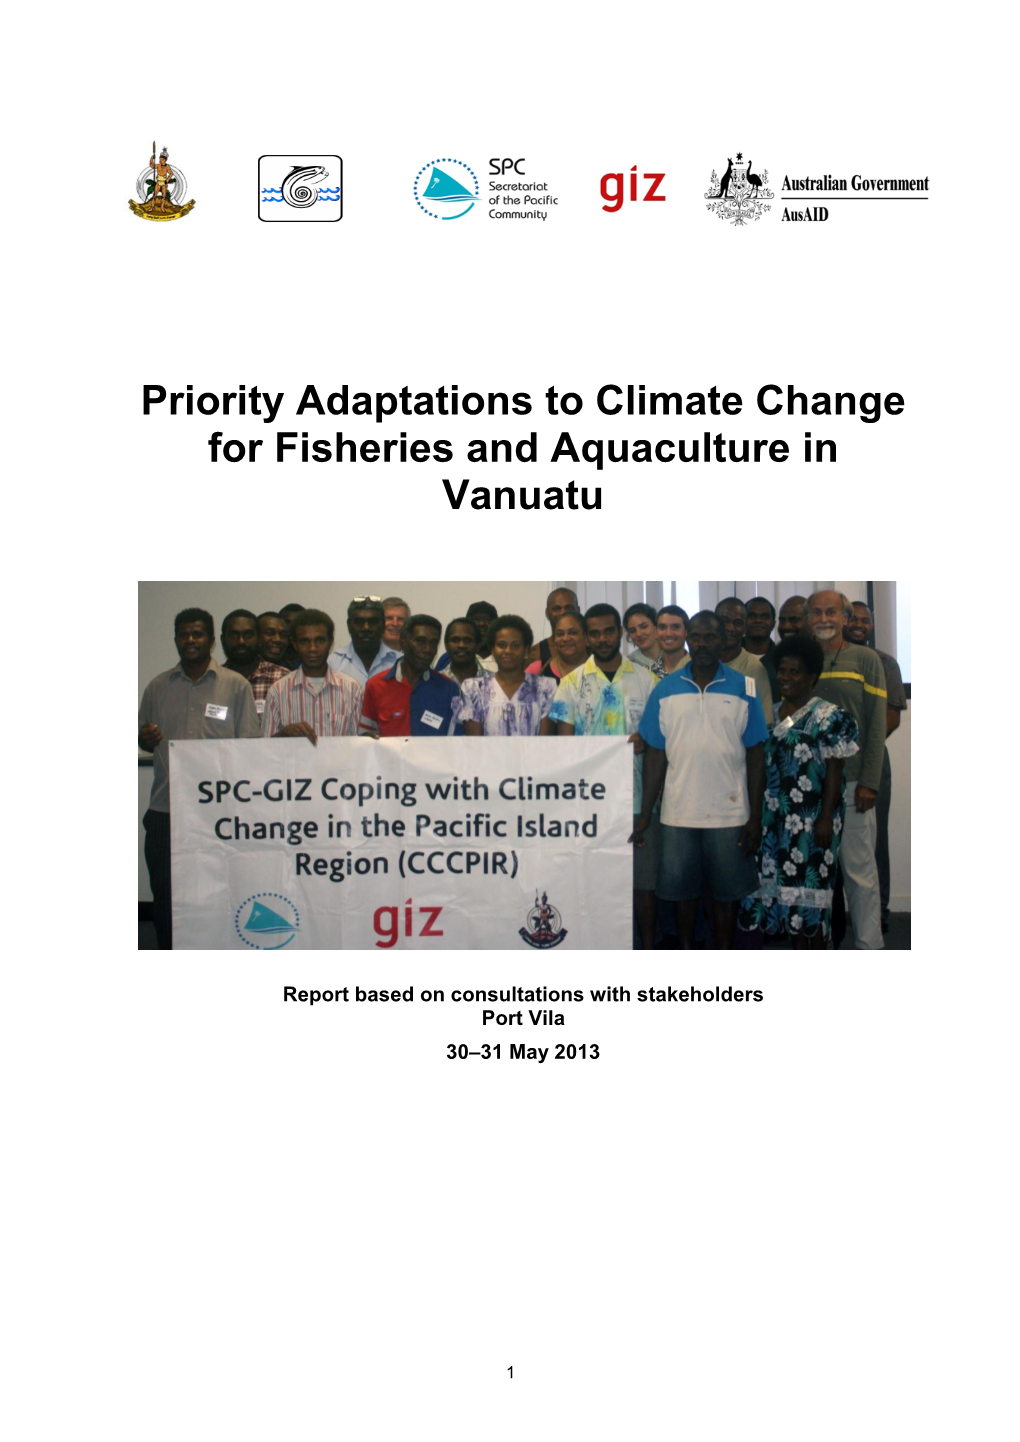 Priority Adaptations to Climate Change for Fisheries and Aquaculture in Vanuatu